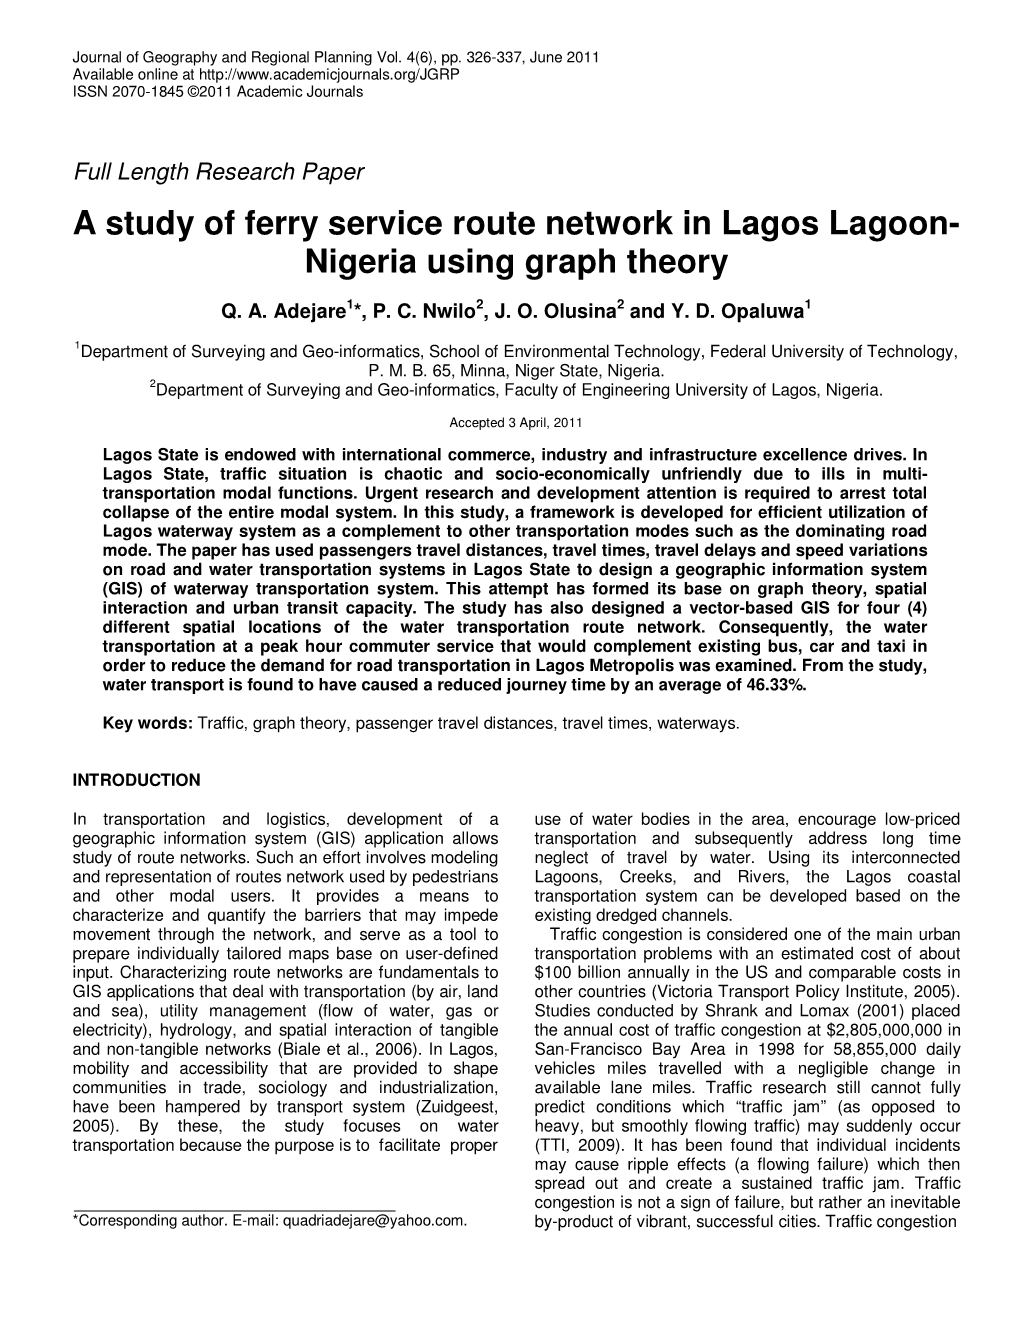 A Study of Ferry Service Route Network in Lagos Lagoon- Nigeria Using Graph Theory